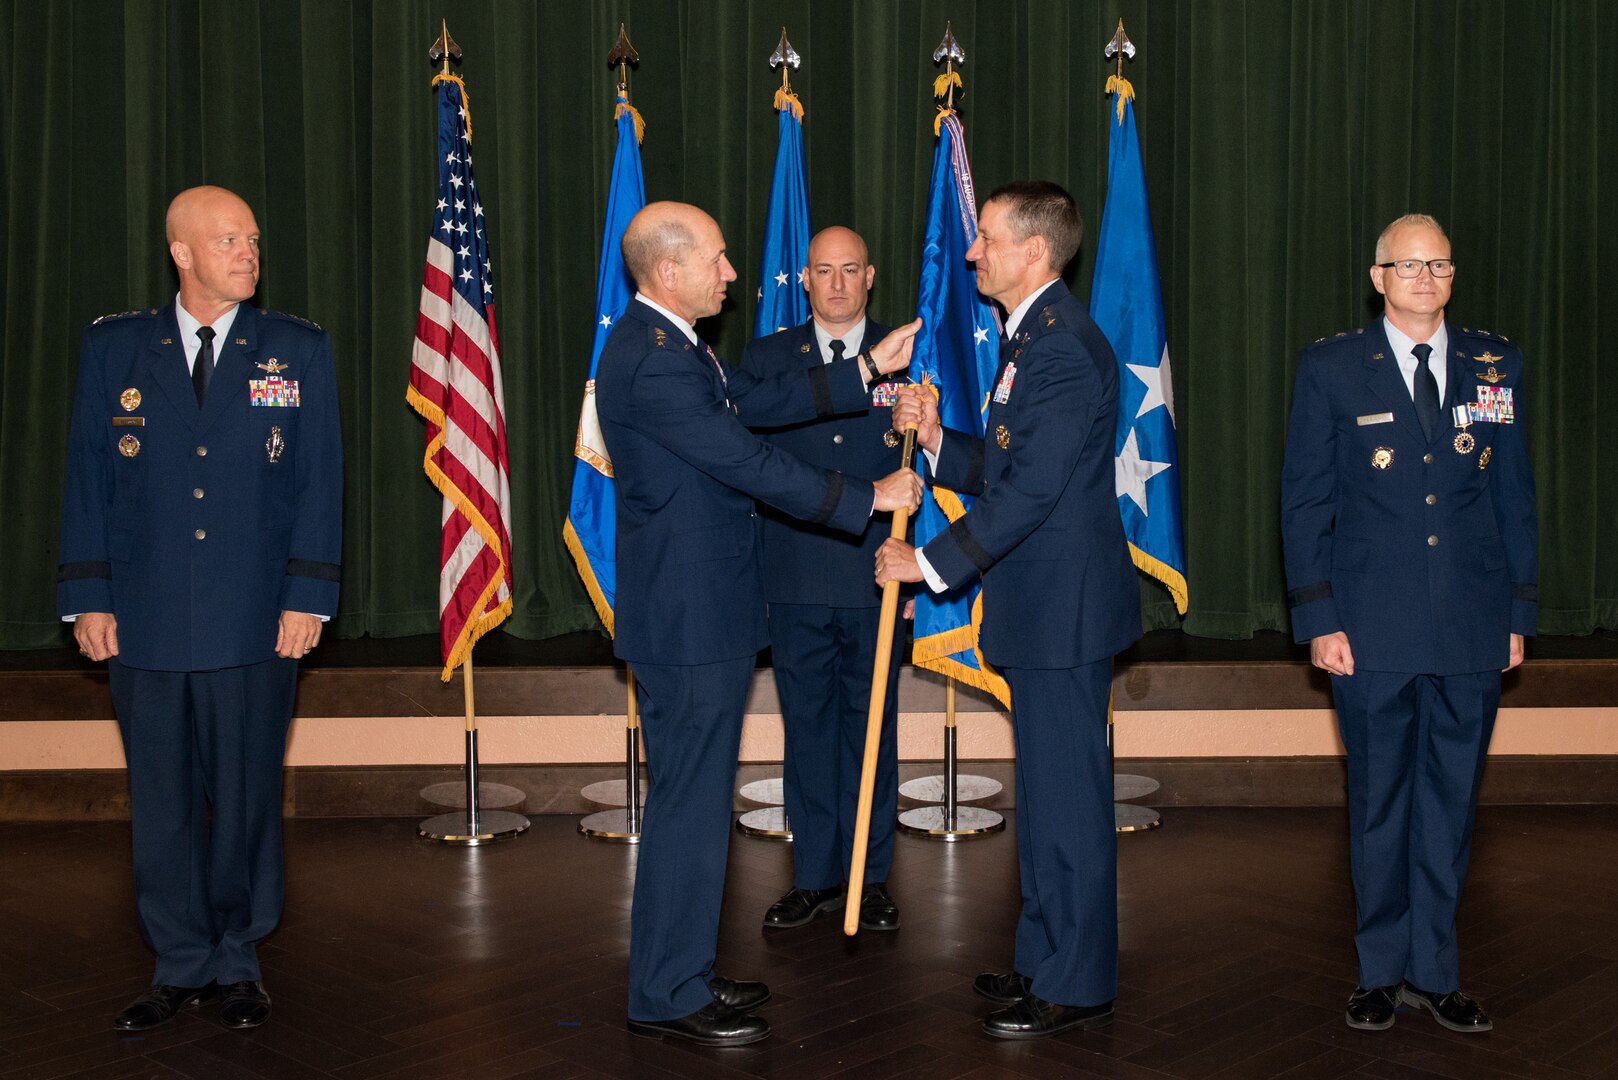 Gen. Mike Holmes, commander of Air Combat Command, presents the 24th Air Force guidon to Maj. Gen. Robert Skinner, who assumed command of the 24th Air Force during a ceremony at Joint Base San Antonio-Lackland July 17. Twenty Fourth Air Force was reassigned to a new major command and welcomed Skinner during the ceremony.